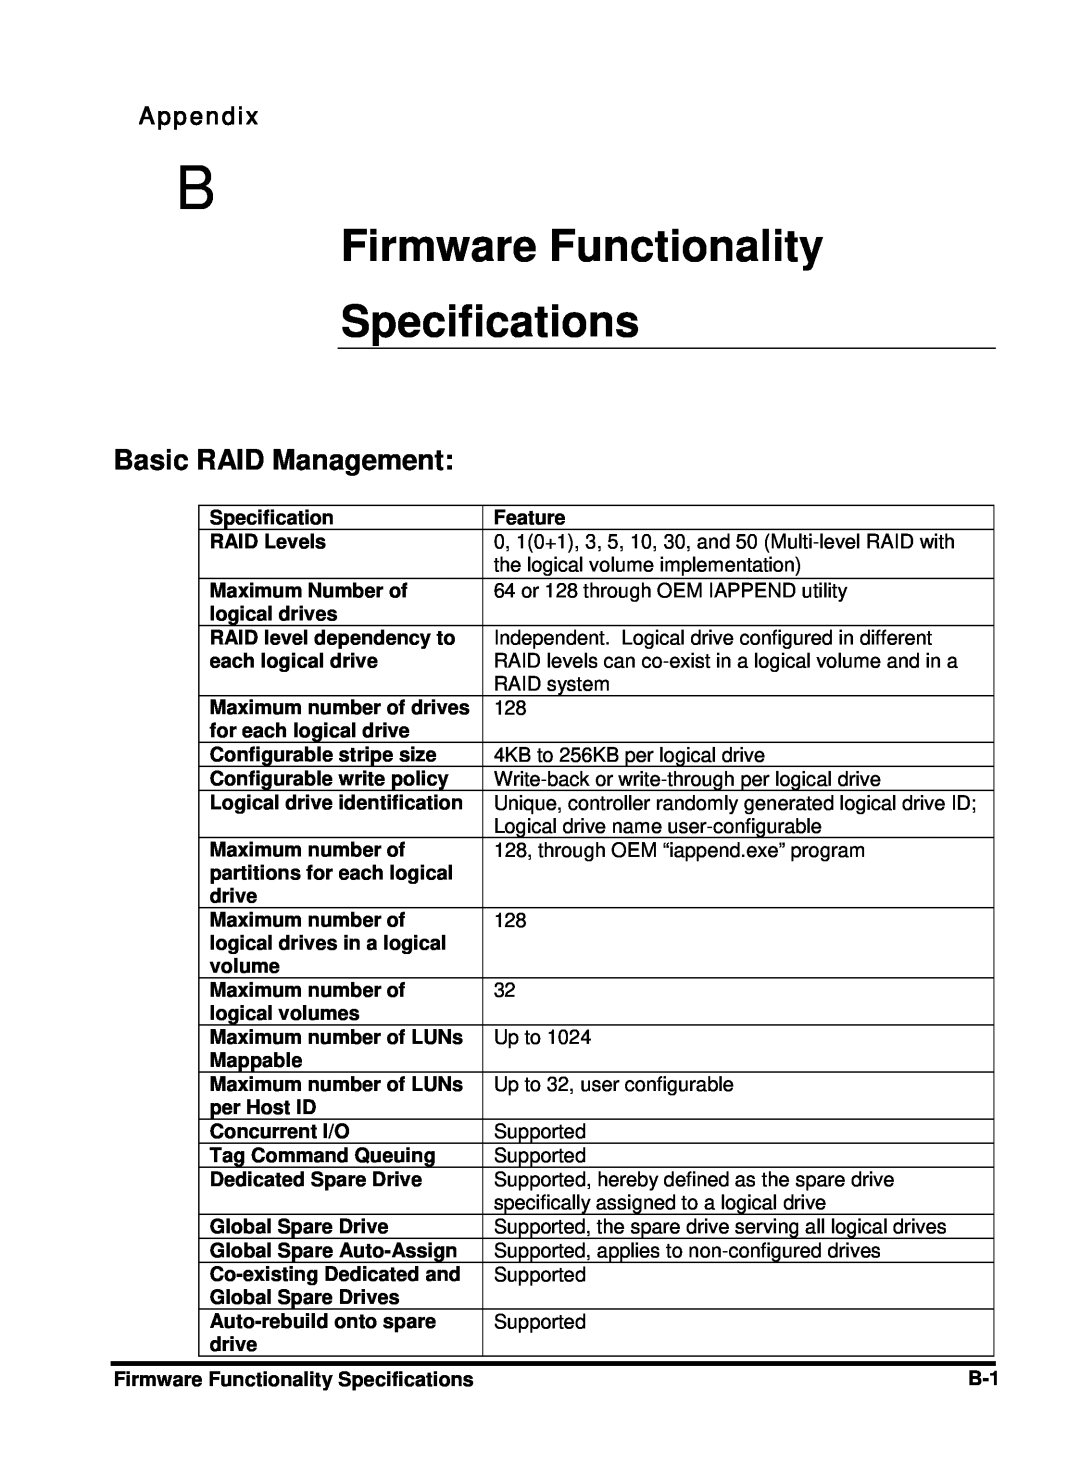 Compaq Infortrend manual Firmware Functionality Specifications, Basic RAID Management, Appendix 